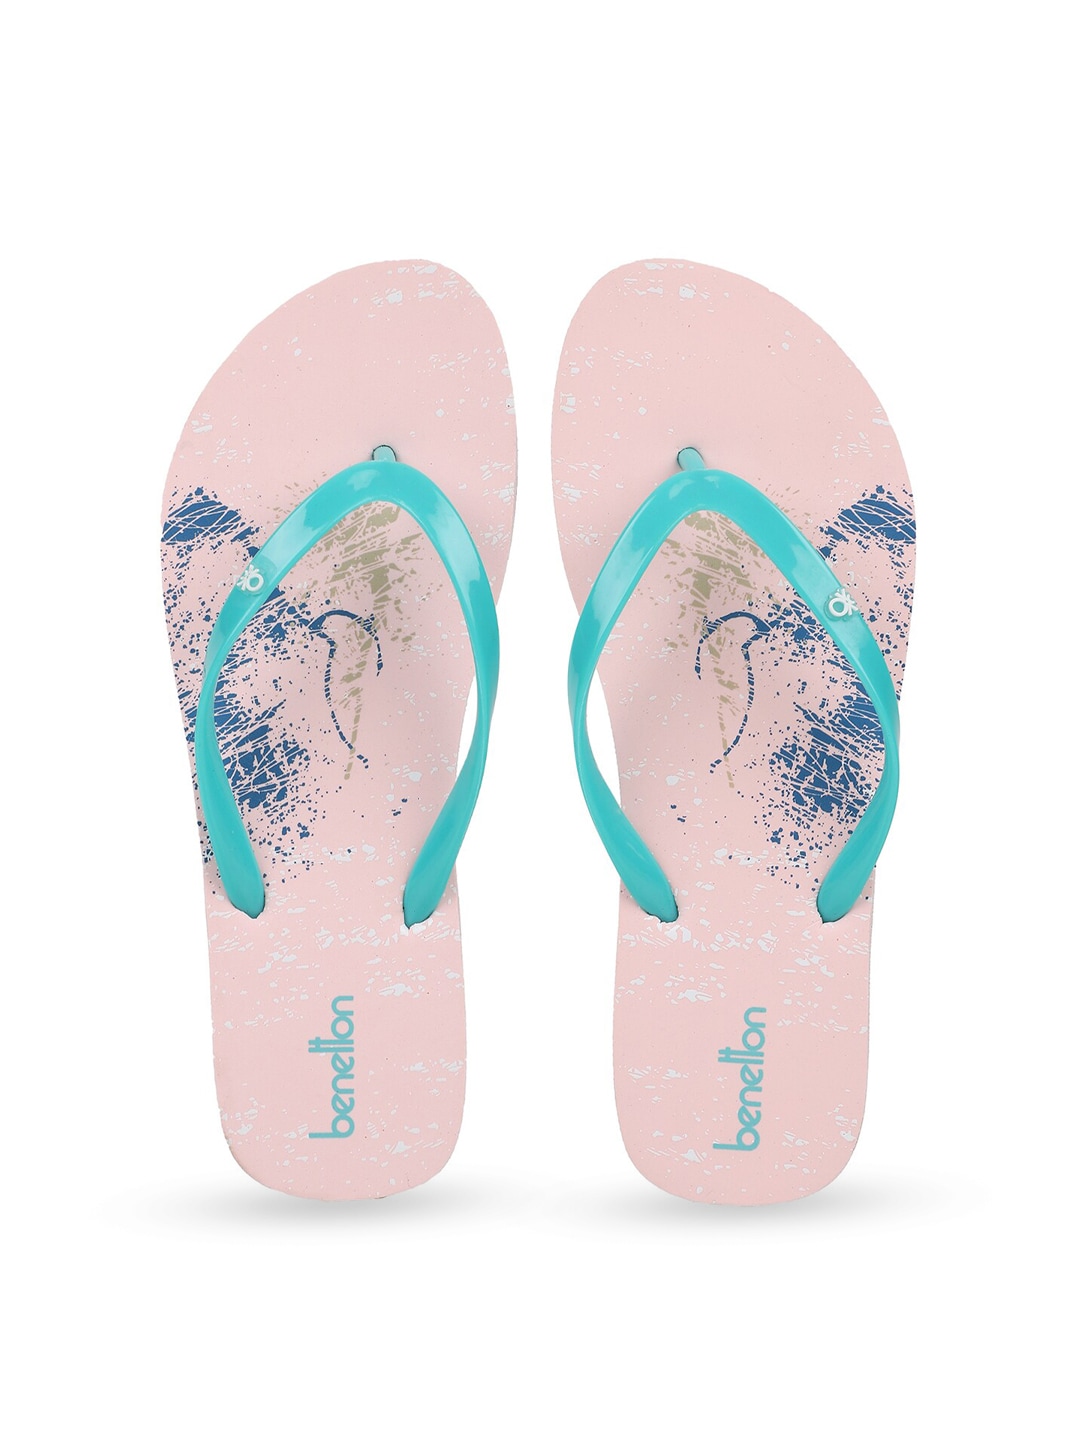 United Colors of Benetton Women Pink & Blue Printed Rubber Thong Flip-Flops Price in India